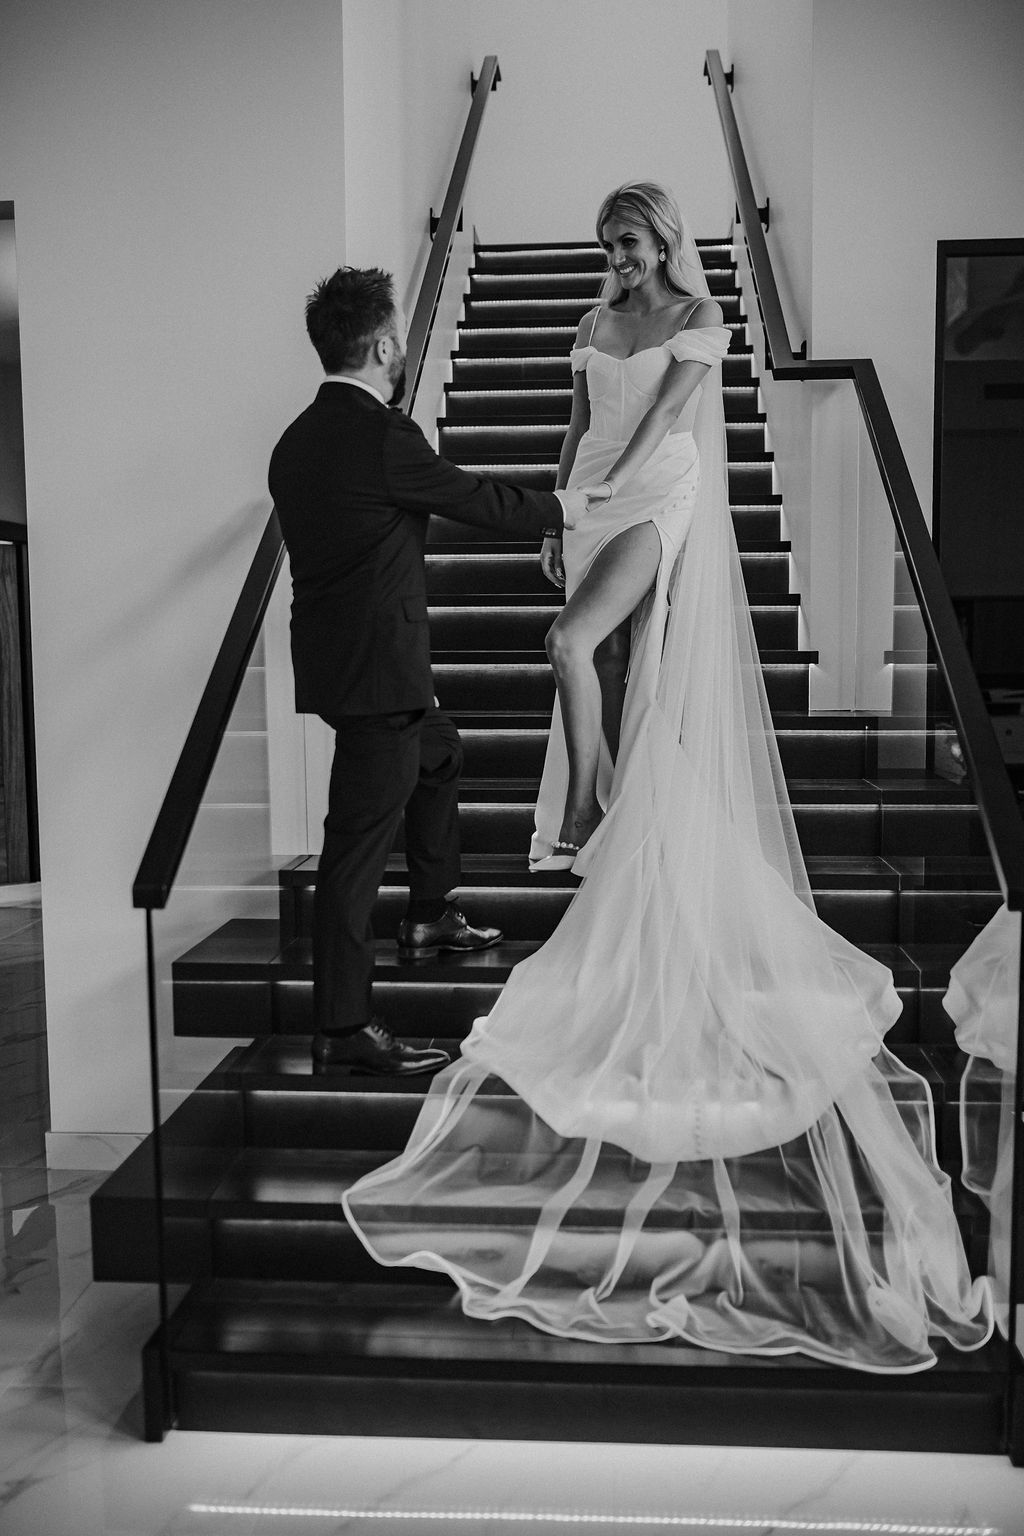 Groom leads bride down the dramatic staircase in modern, Red Deer wedding venue, bride is wearing an elegant wedding gown with slit providing a contrast to the black staircase. 